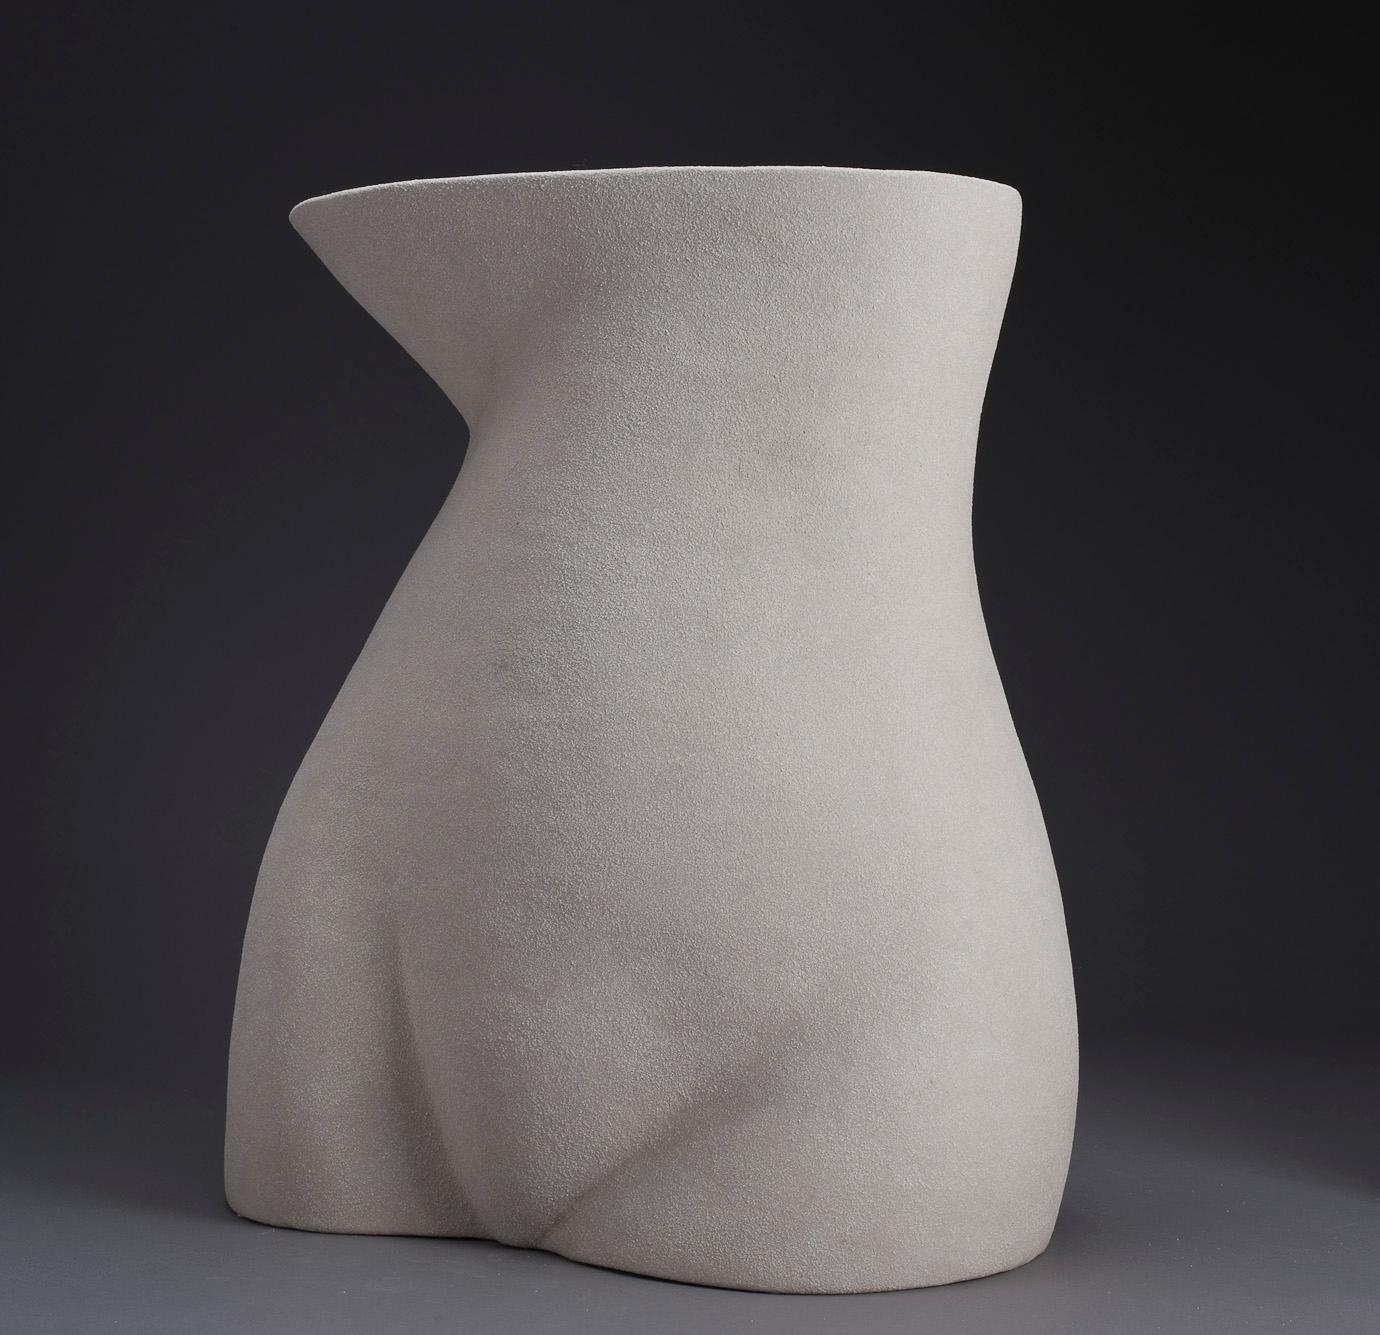 Steve Cartwright, Decolette

Handmade Sculptural Ceramic, Stoneware Clay, fired to 1250c

42 x 36 cm (16.5 x 13.6 in)

Edition of 5 per year